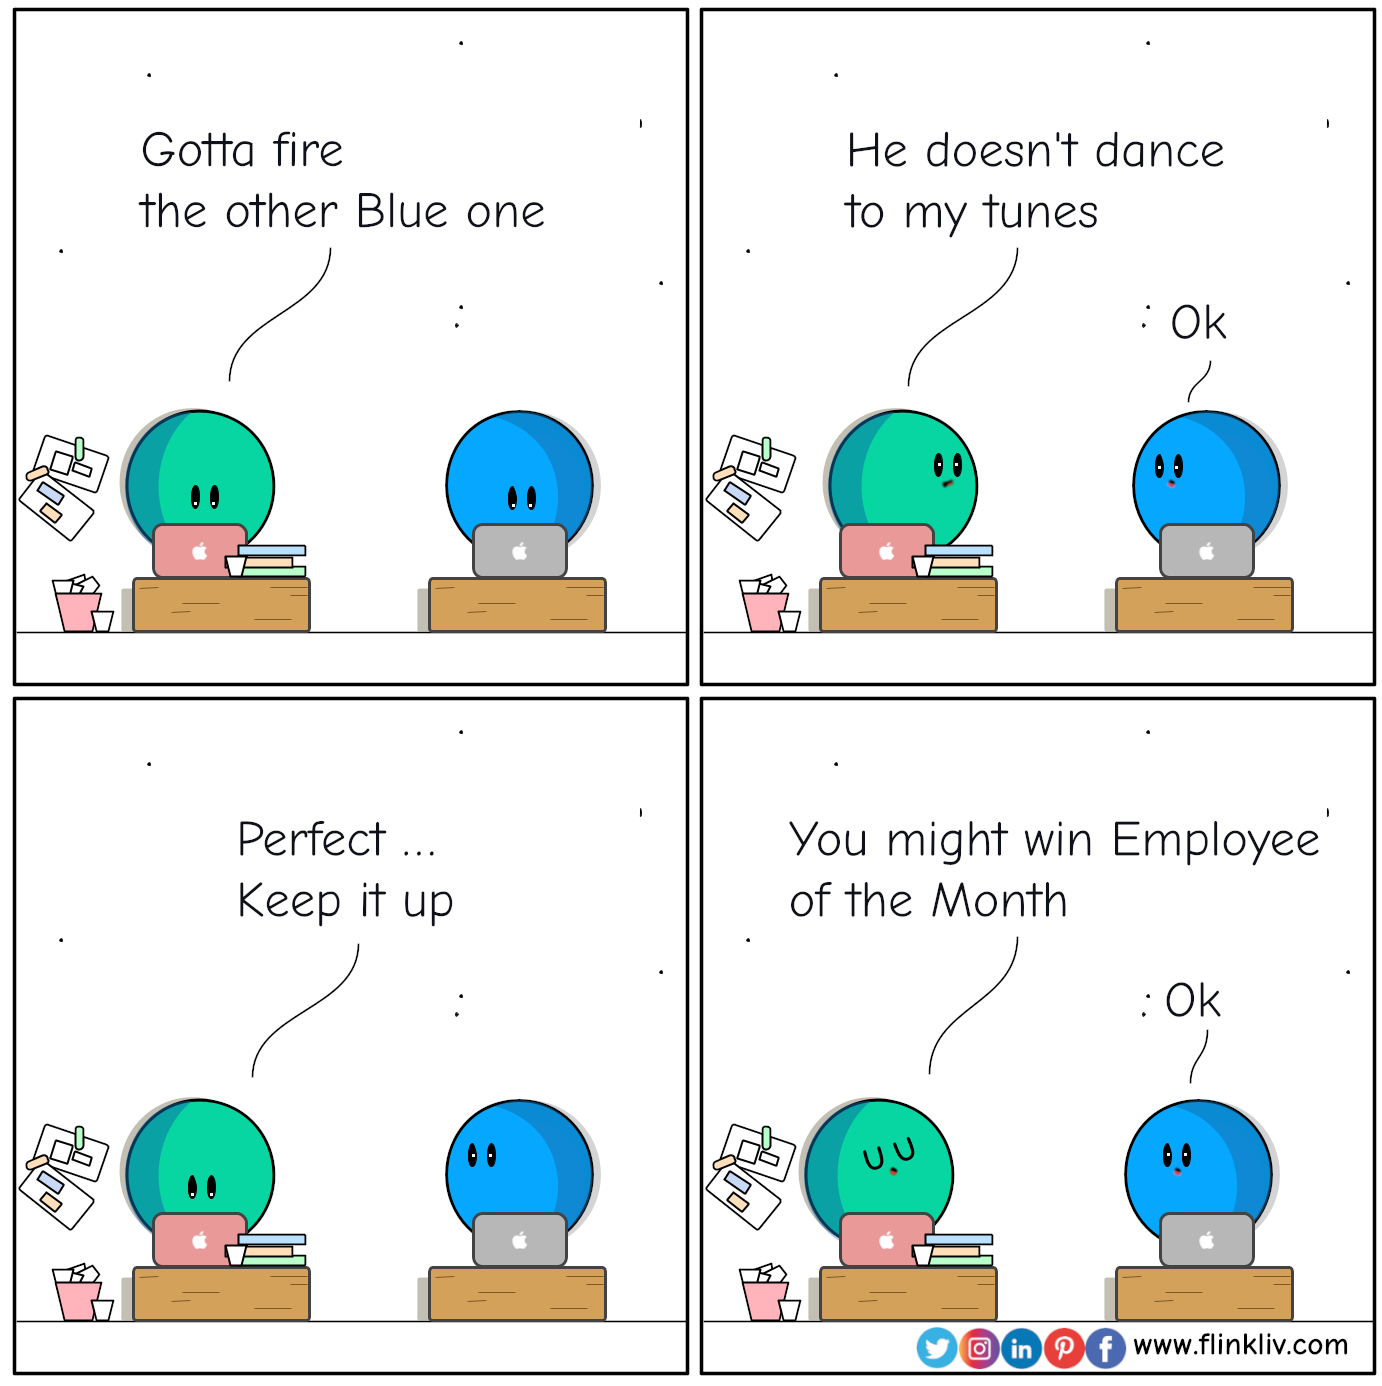 Conversation between A and B about toxic boss compliance strategy. 
				A Gotta fire the other Blue one. 
				He doesn't dance to my tunes. 
				B: Ok.
				A: Perfect. Keep it up. You might win employee of the month.
				By Flinkliv.com
			